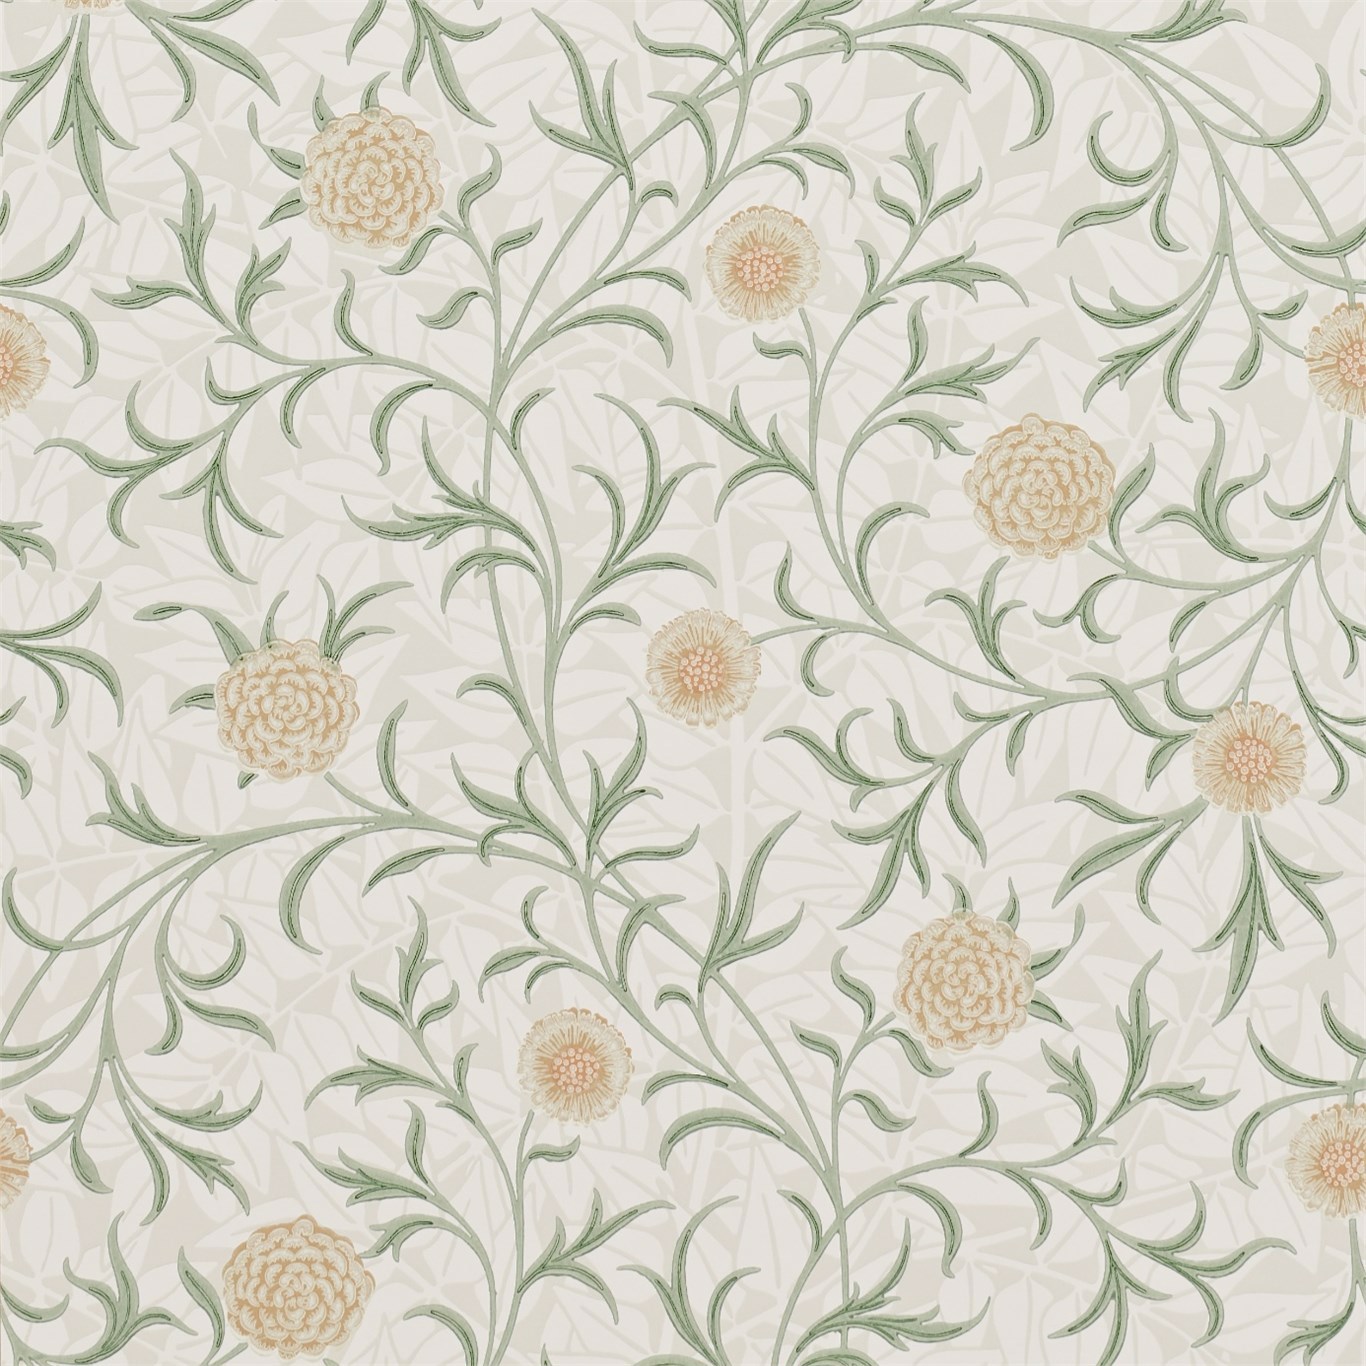 Scroll Thyme/Pear Wallpaper by MOR